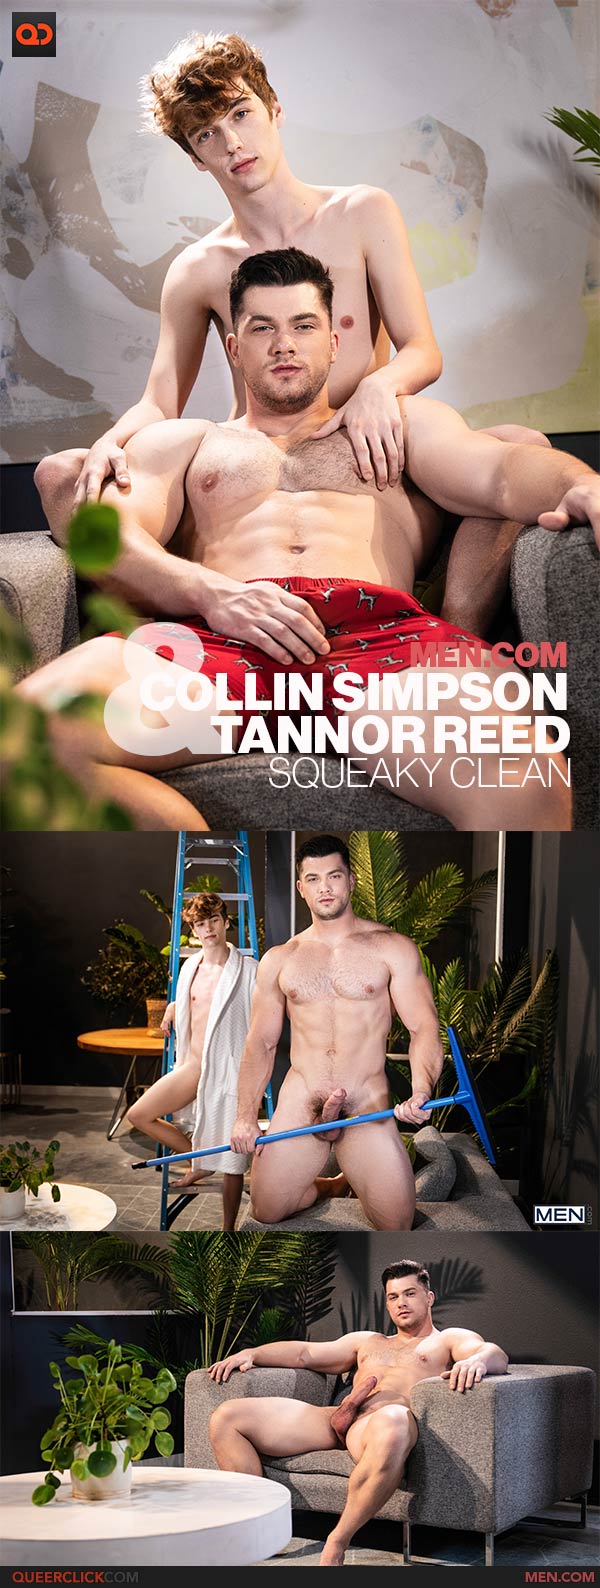 Collin simpson onlyfans